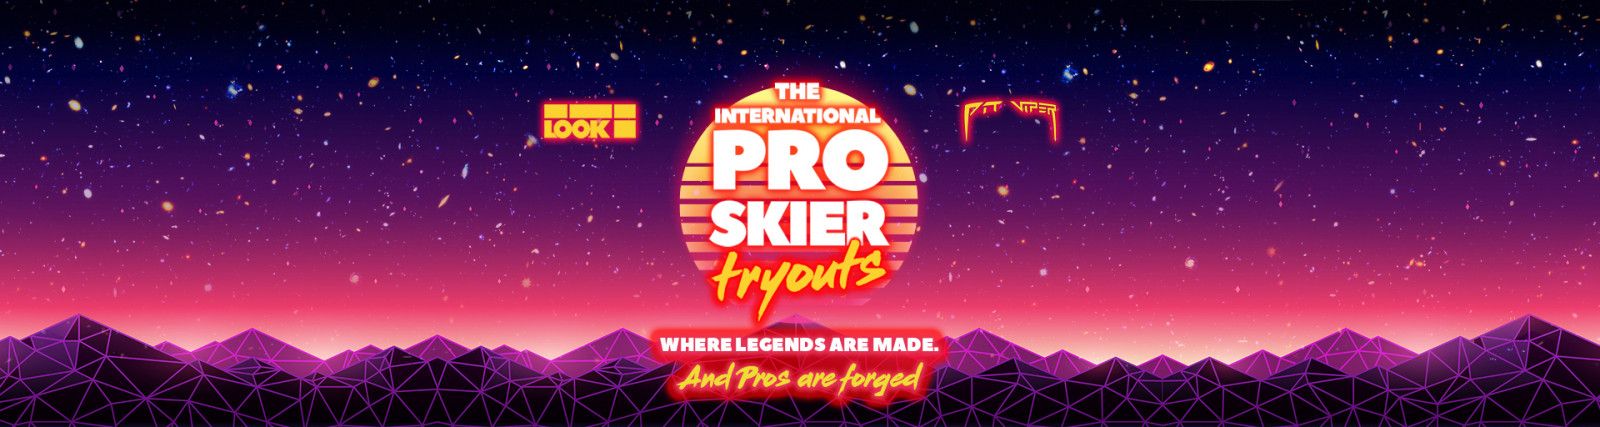 pro skier tryout out banner image